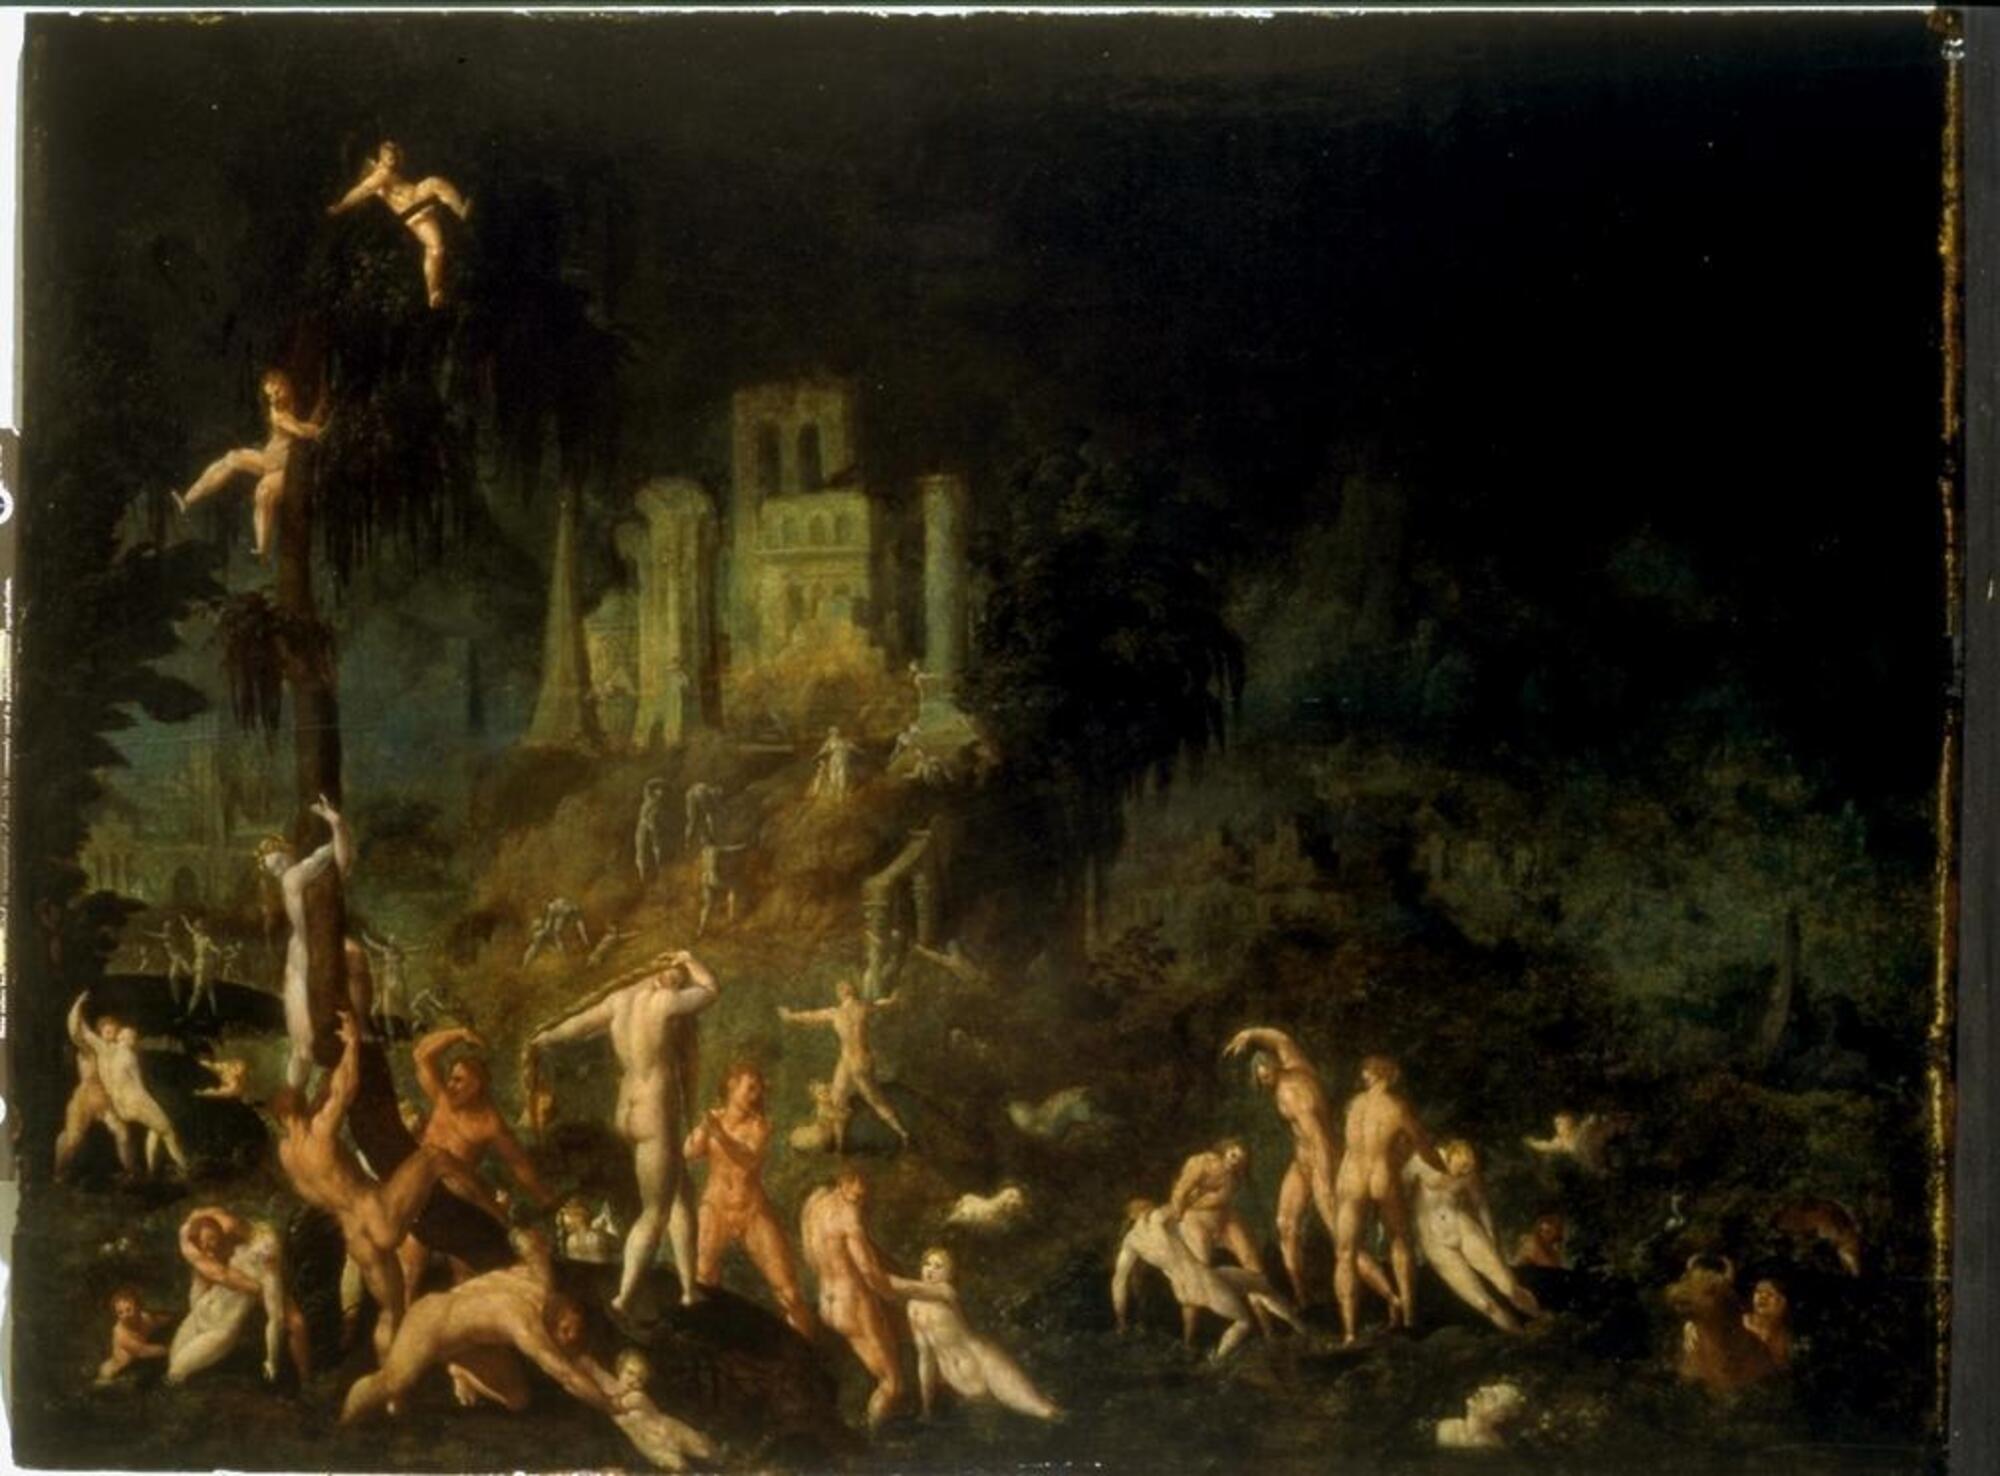 In an ominous landscape a crowd of nude men, women and children, their bodies silhouetted against the descending gloom, struggle frantically to escape rising floodwaters. The figures gesture wildly and strenuously twist their long athletic bodies into a seemingly infinite variety of contortions as they clamber up the last hilltops and trees. A city stands on a hill and appears through the trees in the background.